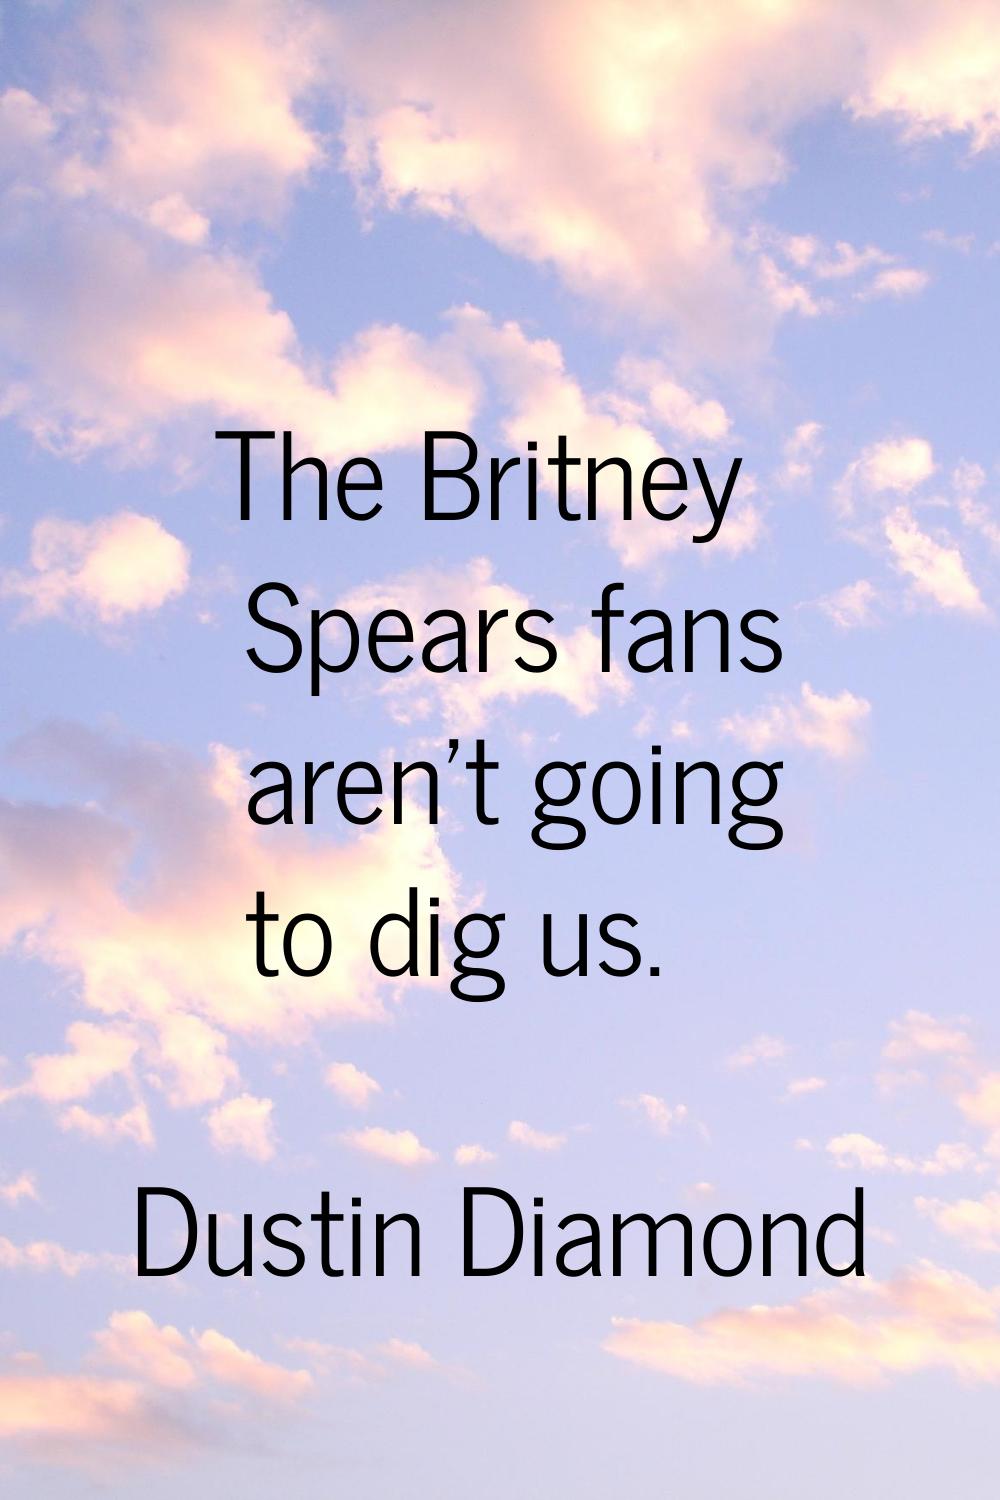 The Britney Spears fans aren't going to dig us.